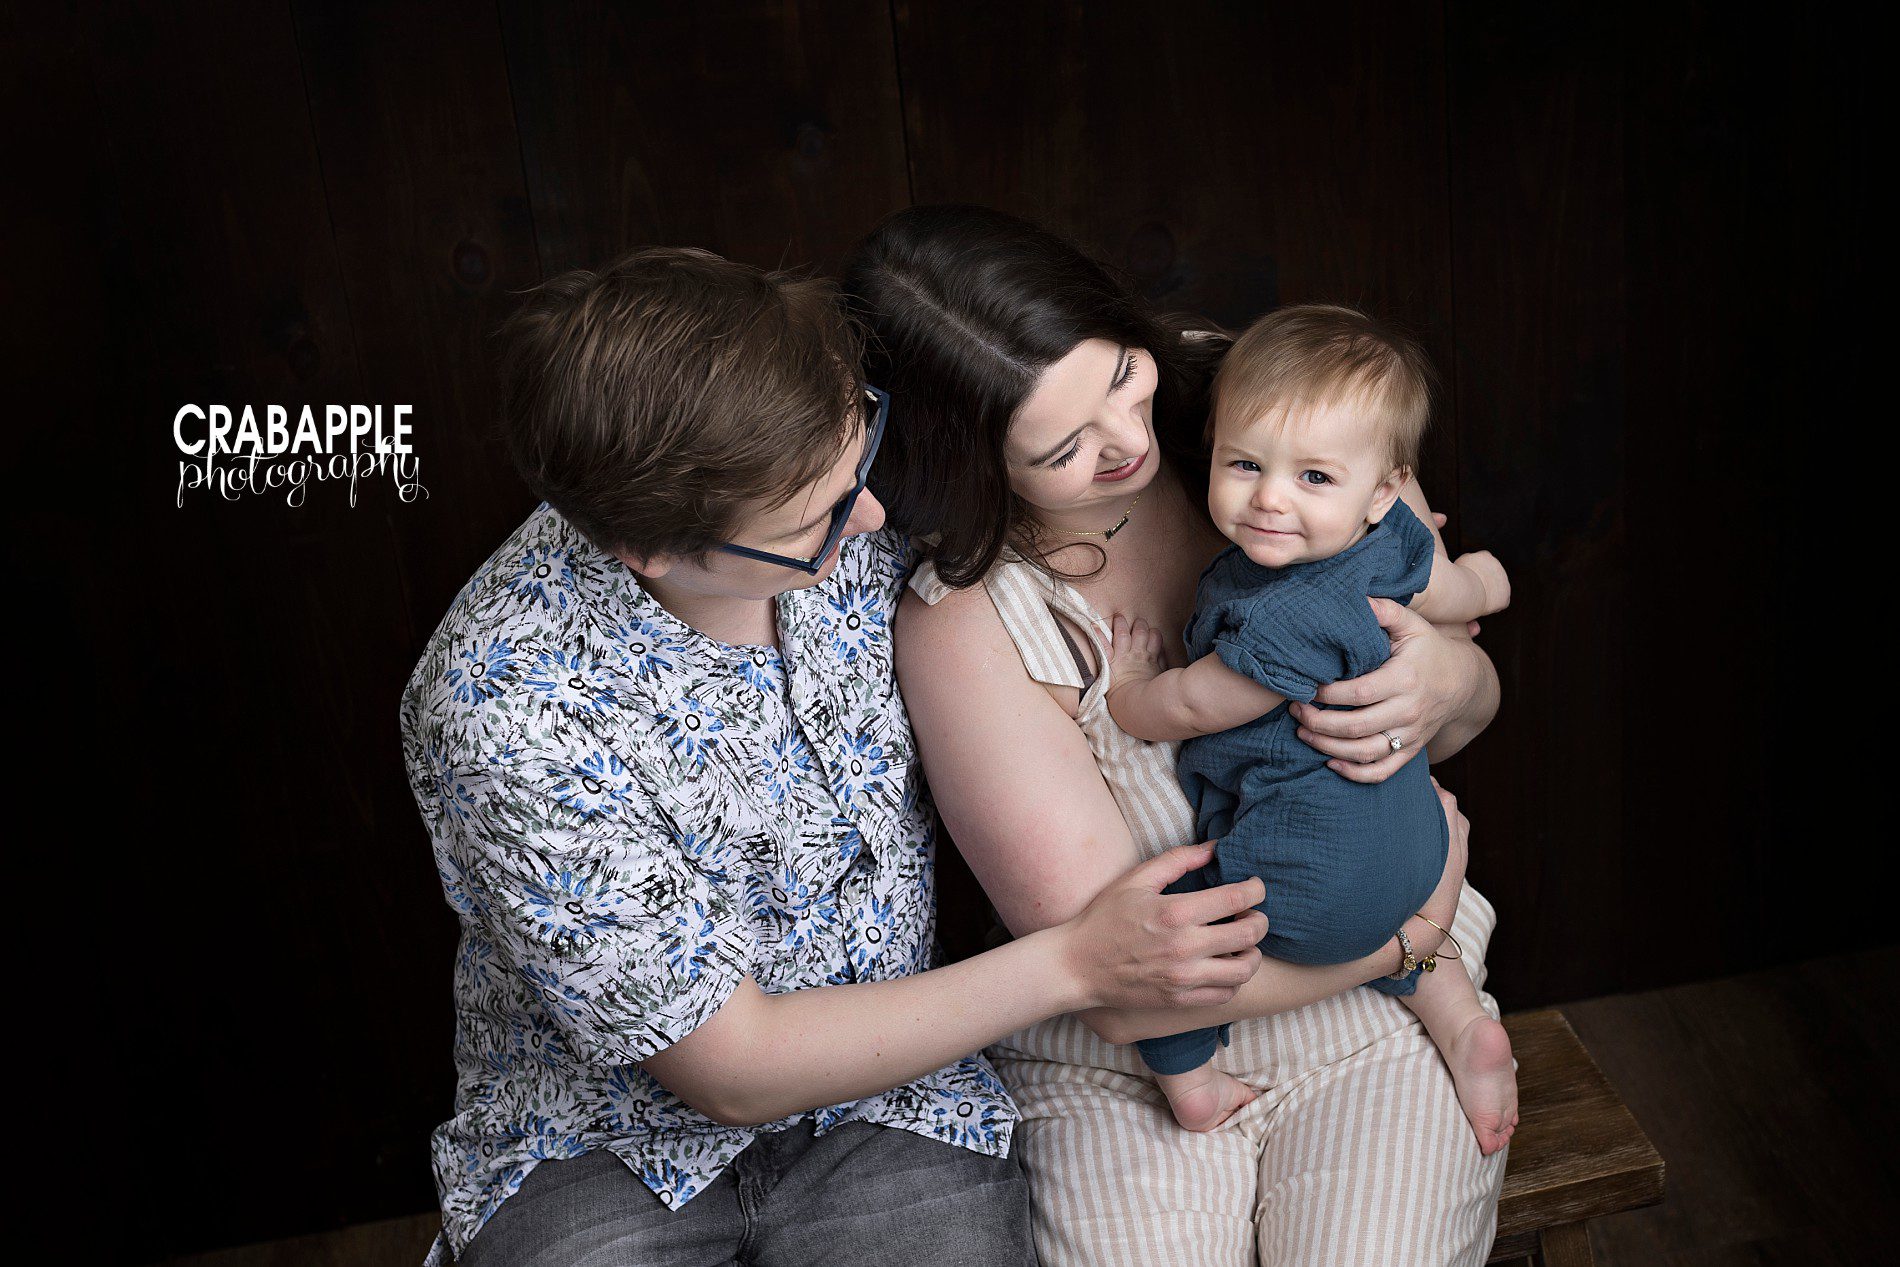 family photo ideas with 8 month old